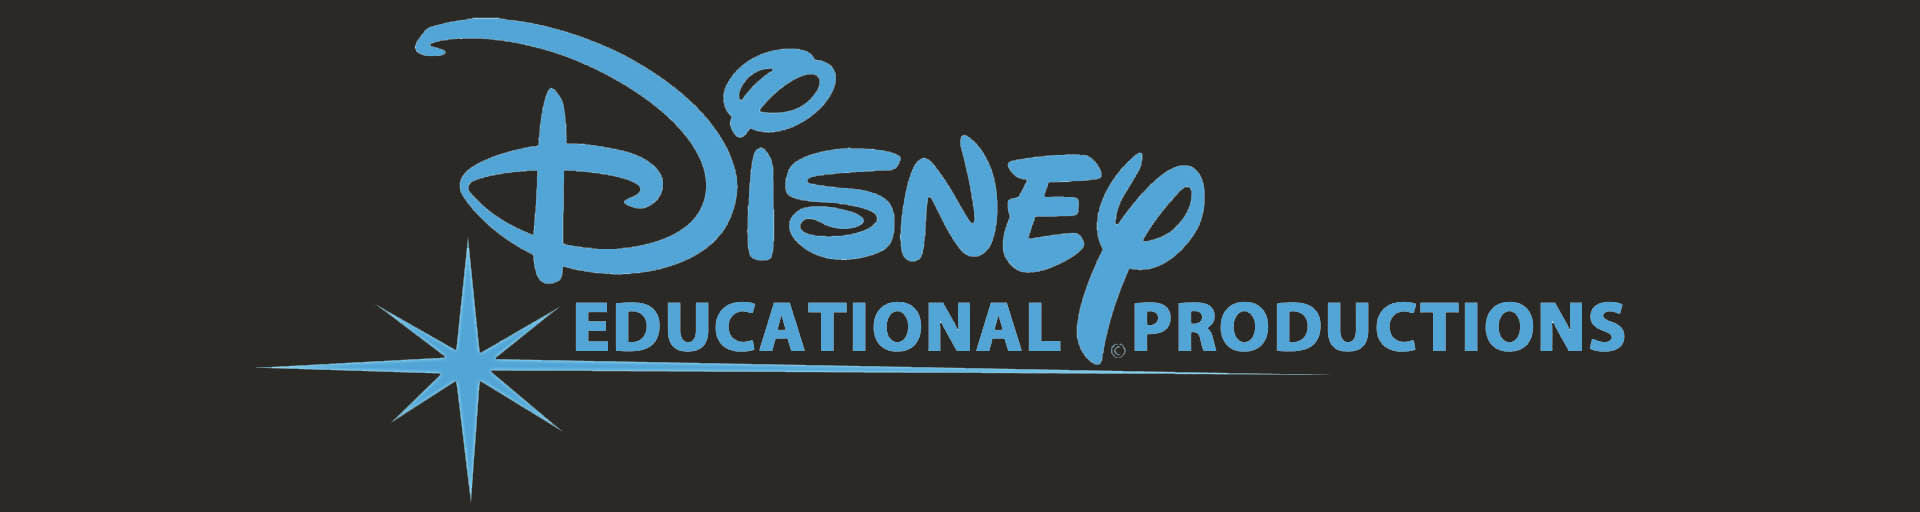 Image for Disney Educational Productions